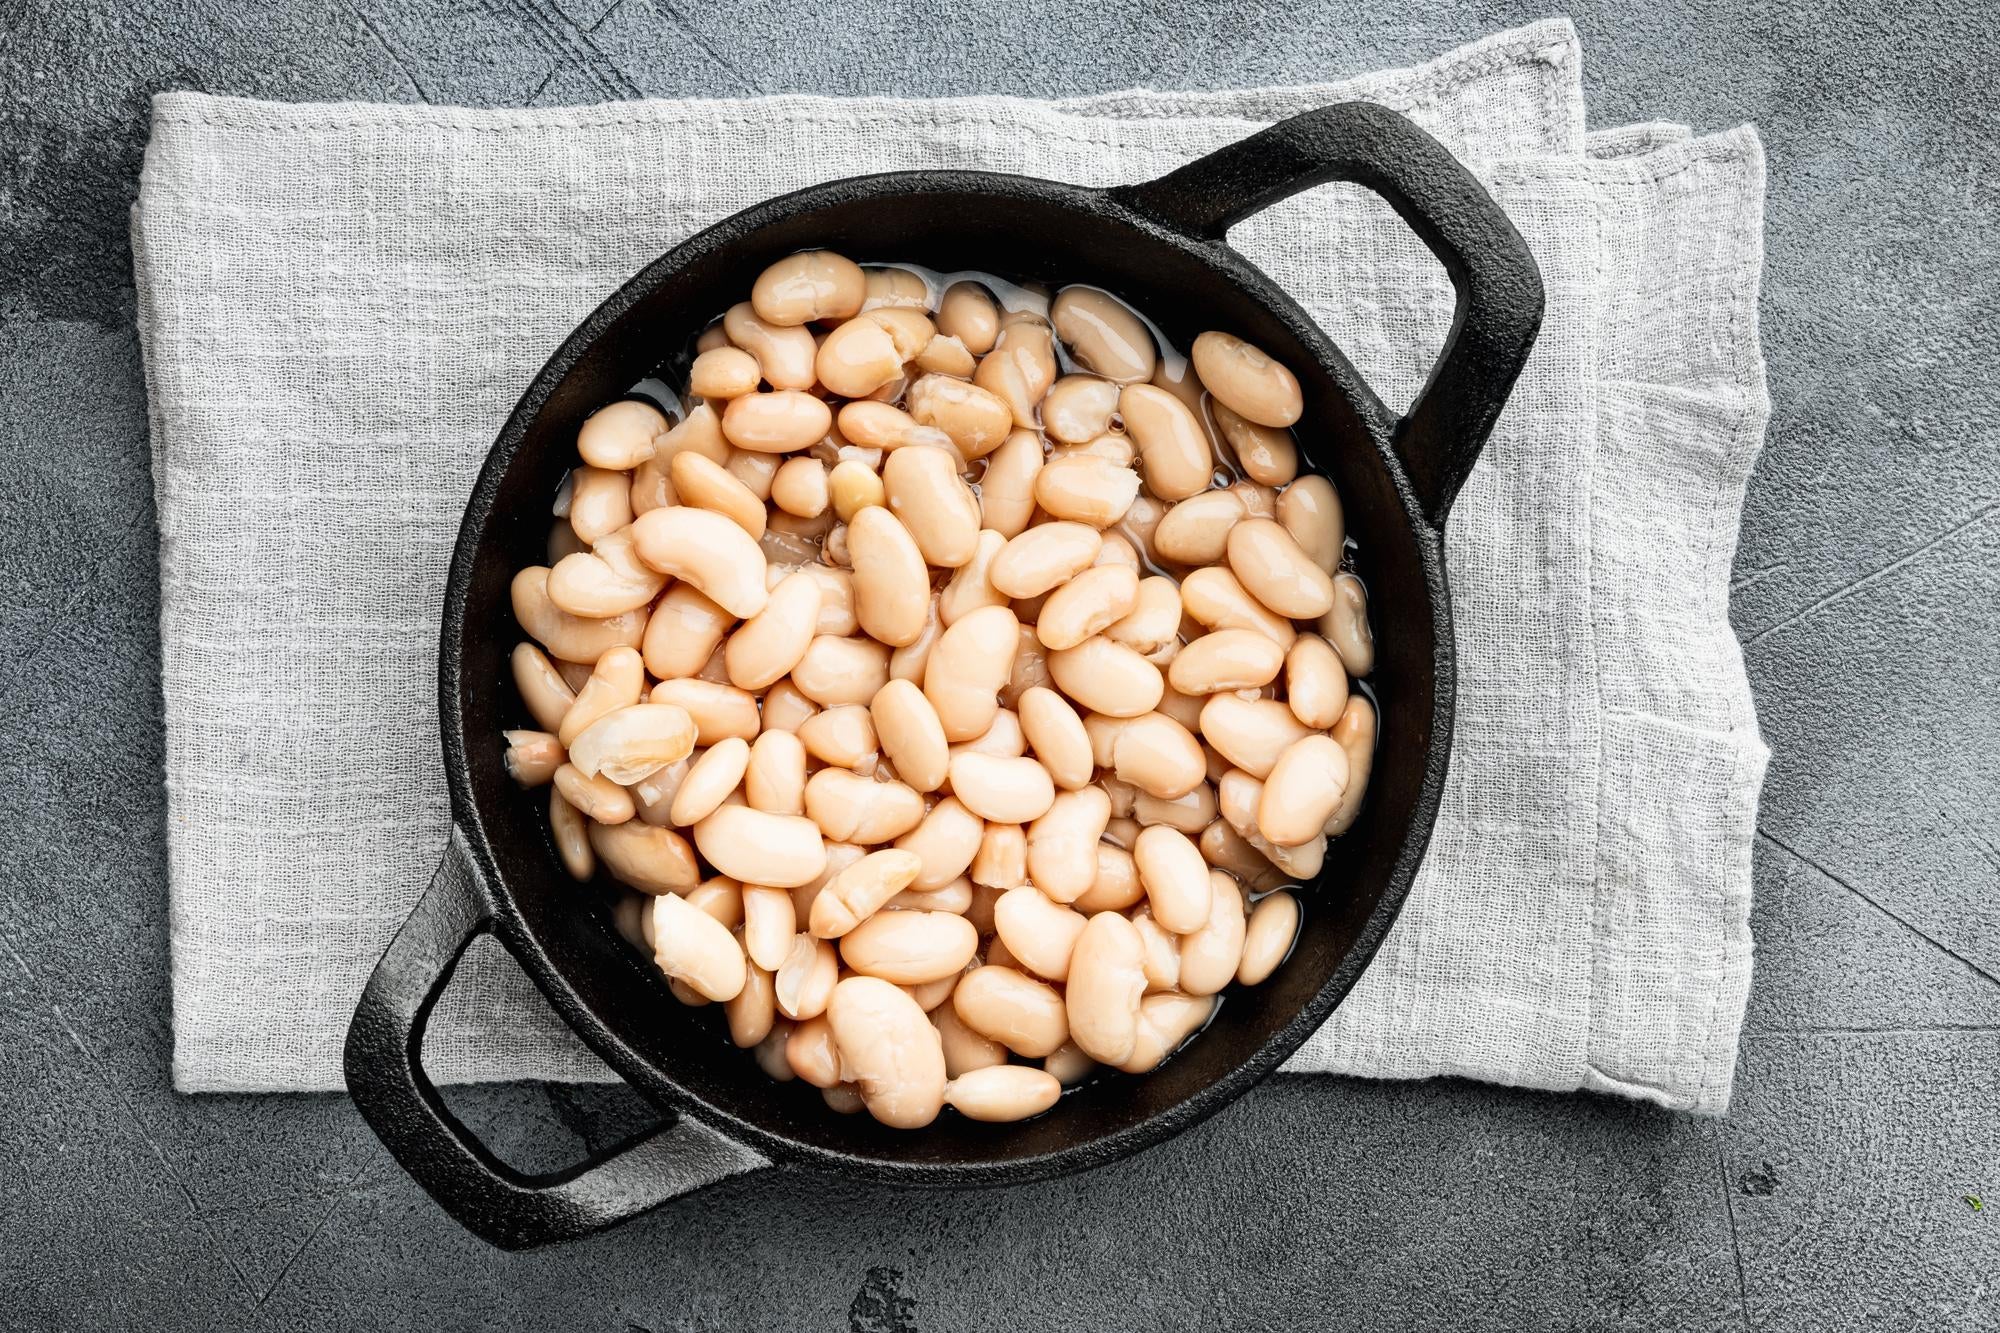 Easy and Simple: Cooking Great Northern Beans Step-by-Step